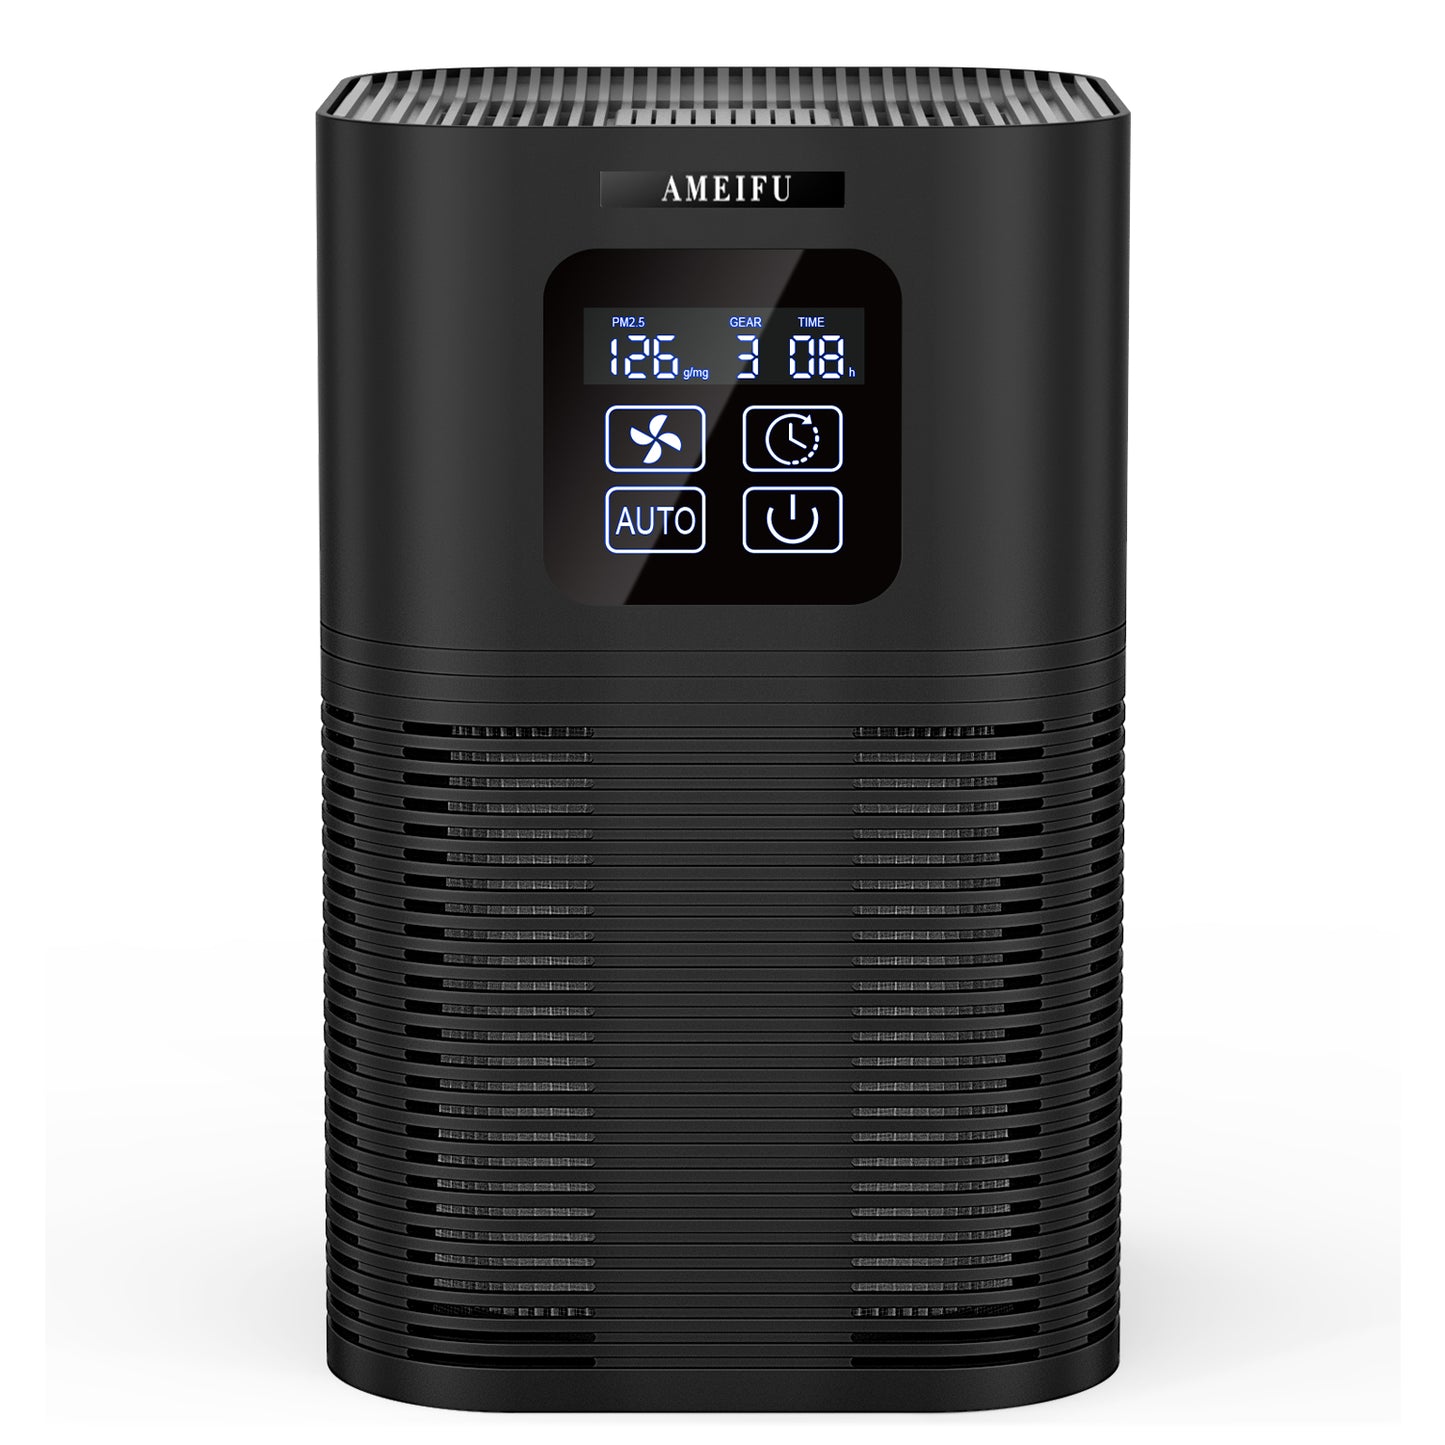 Air Purifiers for Bedroom, AMEIFU Hepa Air Purifier with Aromatherapy, black